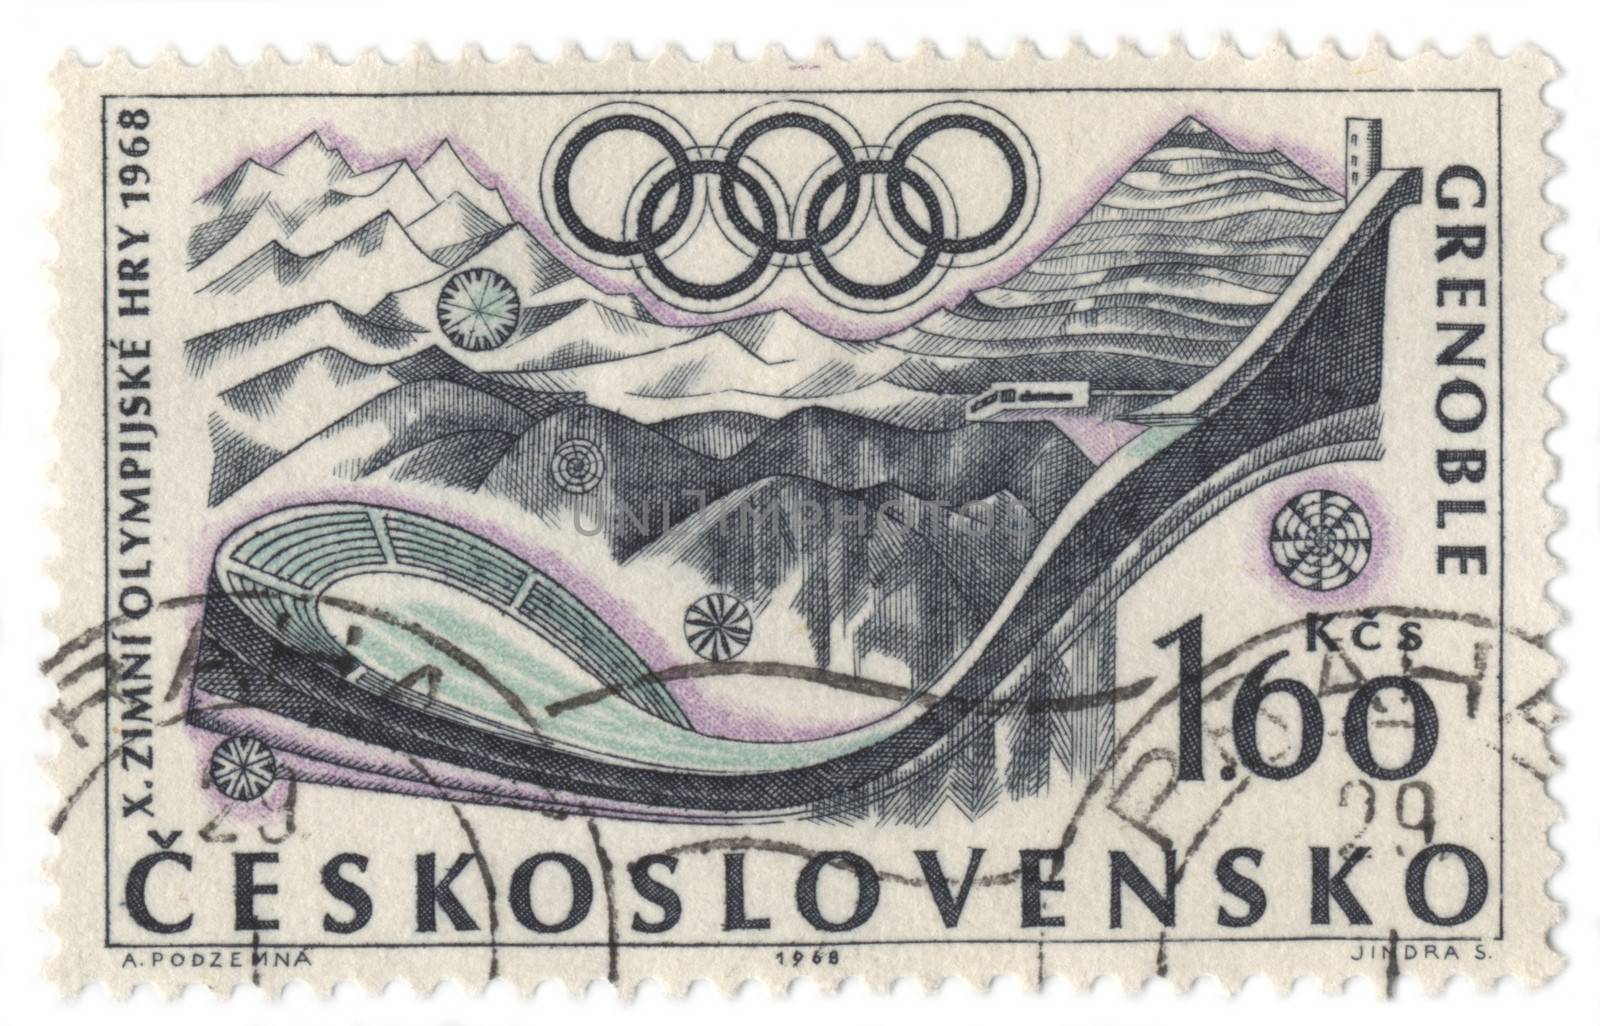 Sport in Grenoble Olympics on post stamp by wander